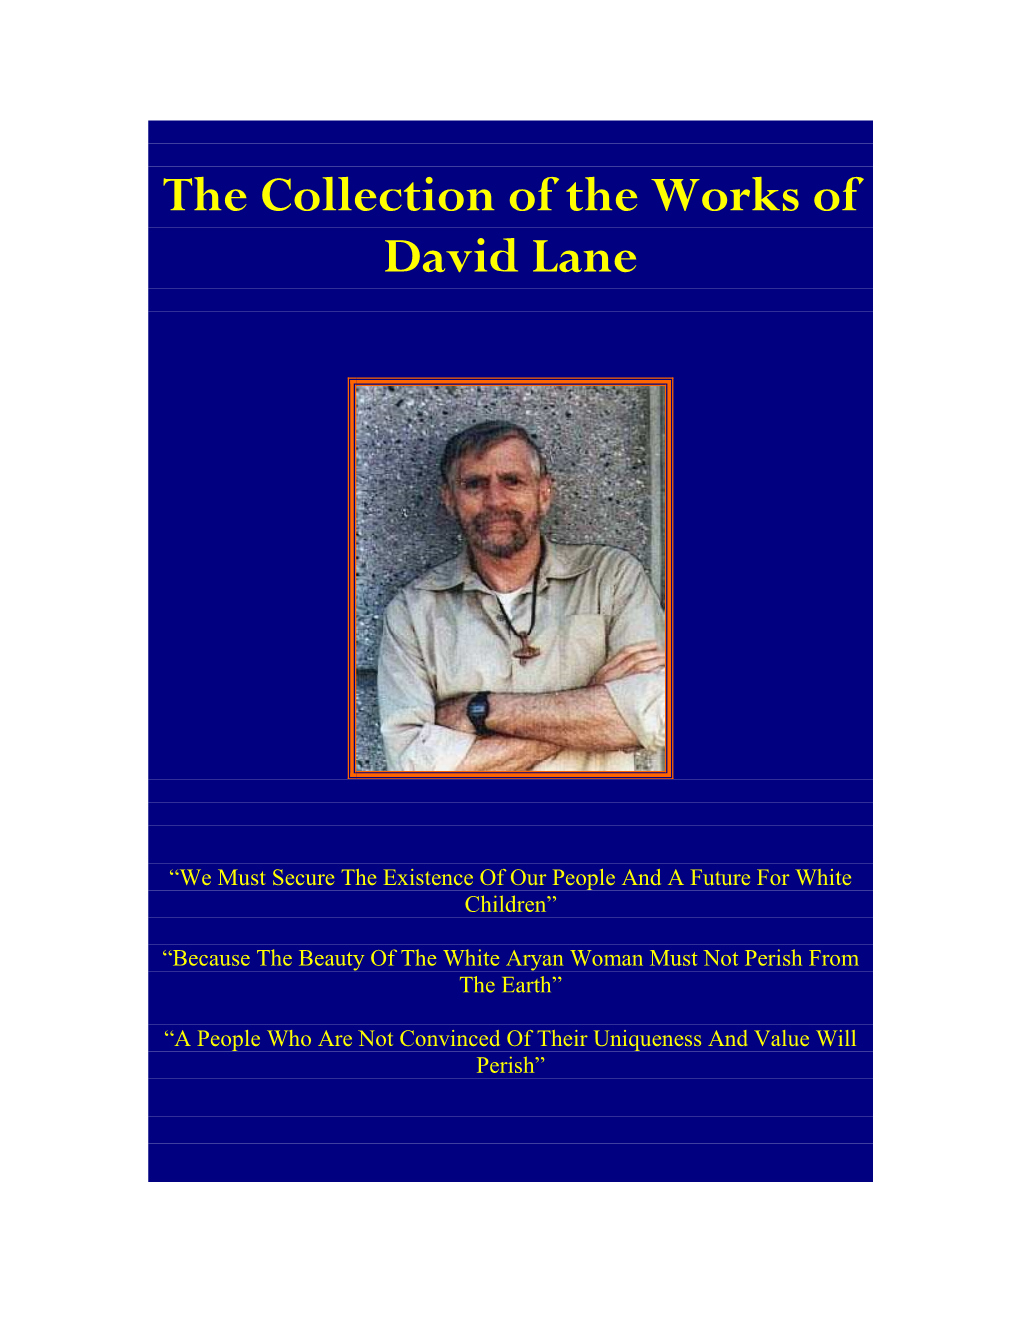 The Collection of the Works of David Lane